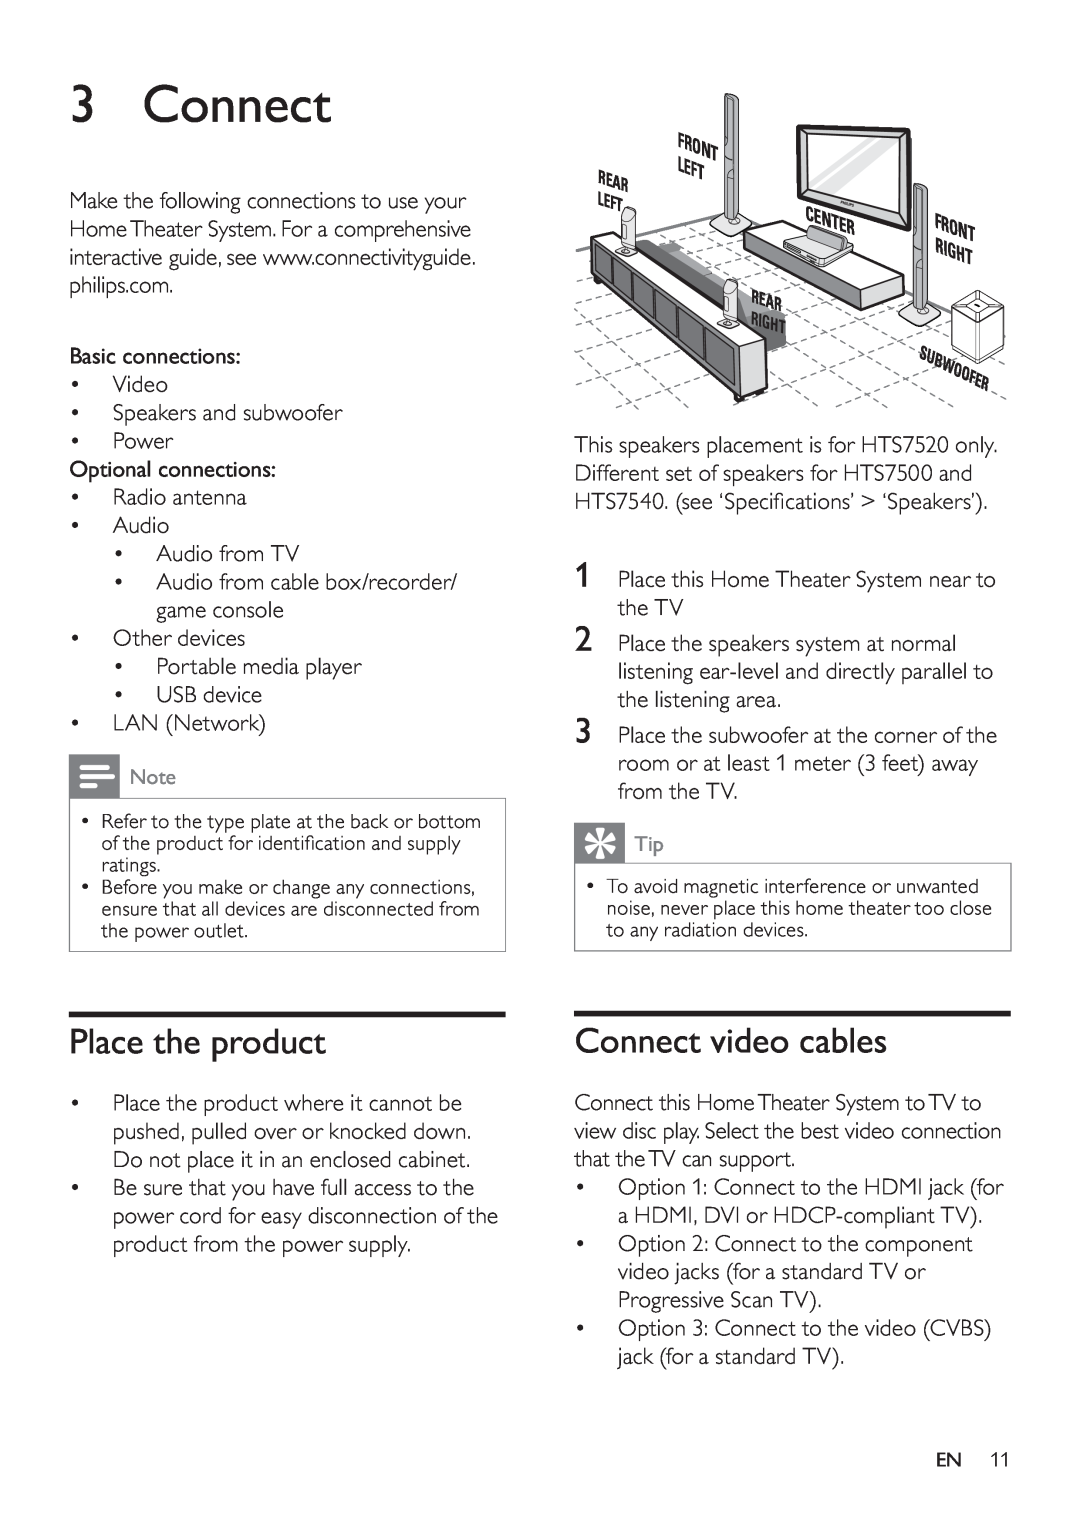 Philips HTS7520, HTS7500 user manual Place the product, Connect video cables, Subwoofer, Center 